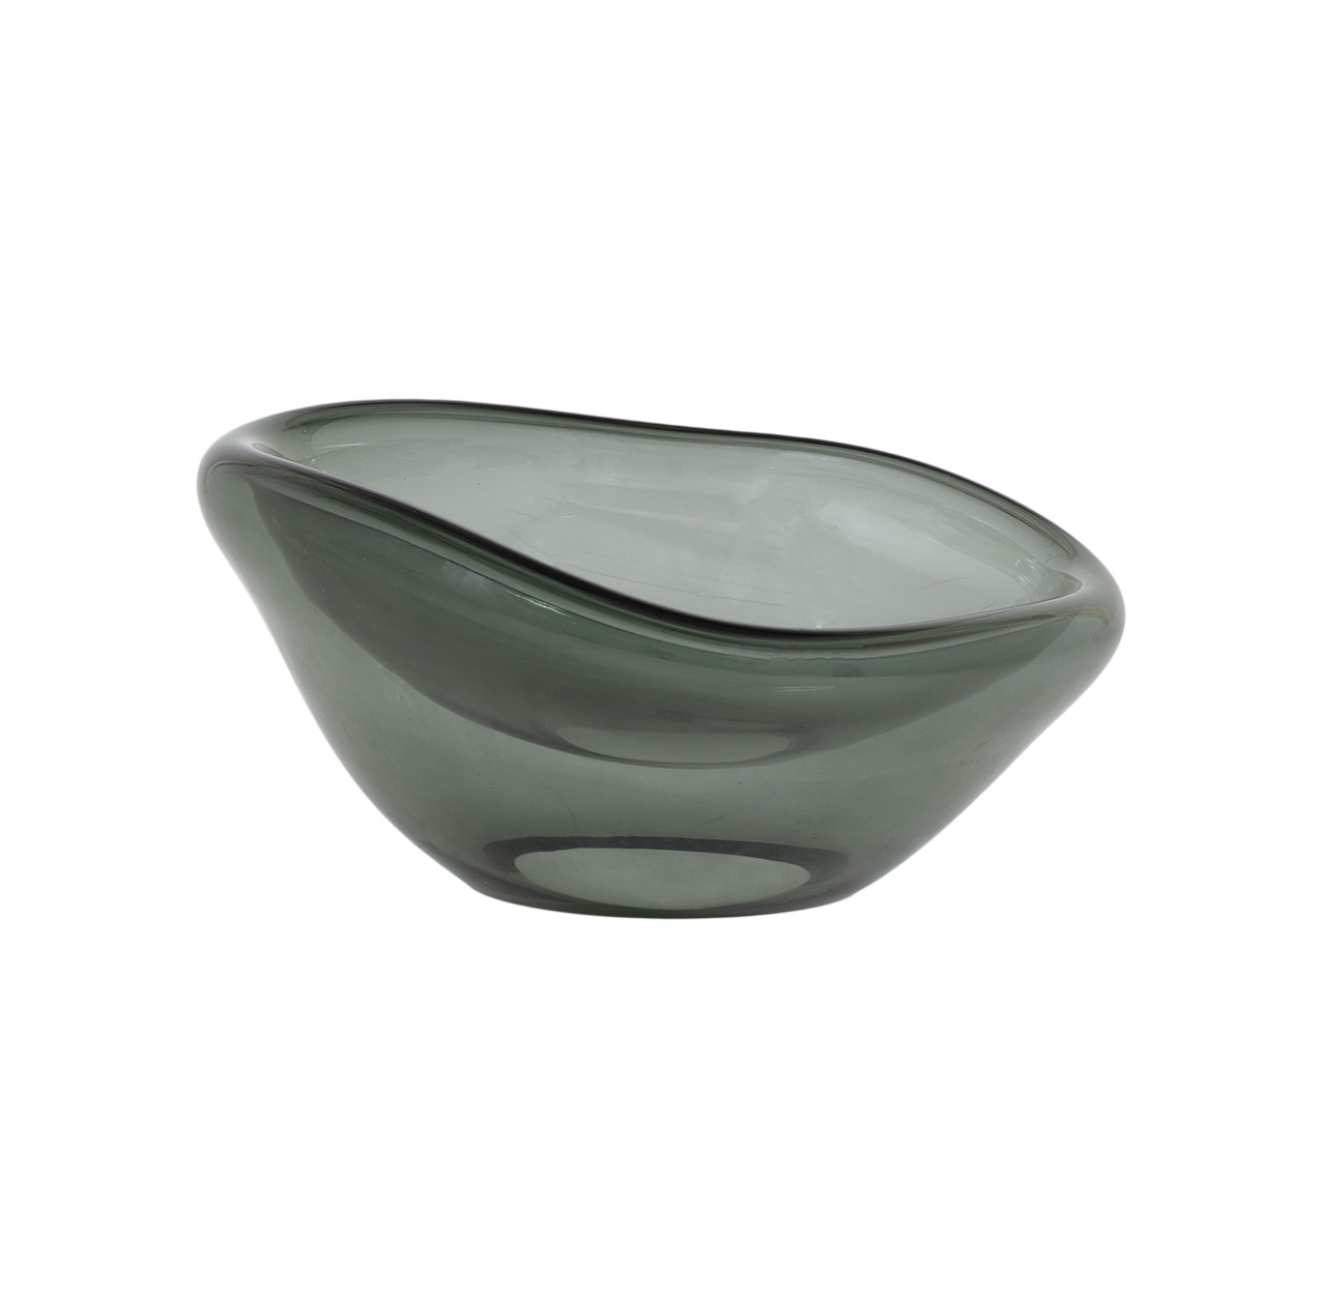 A translucent gray Guillem bowl with a modern, asymmetrical shape, photographed against a white background in a Scottsdale Arizona bungalow by The Import Collection.